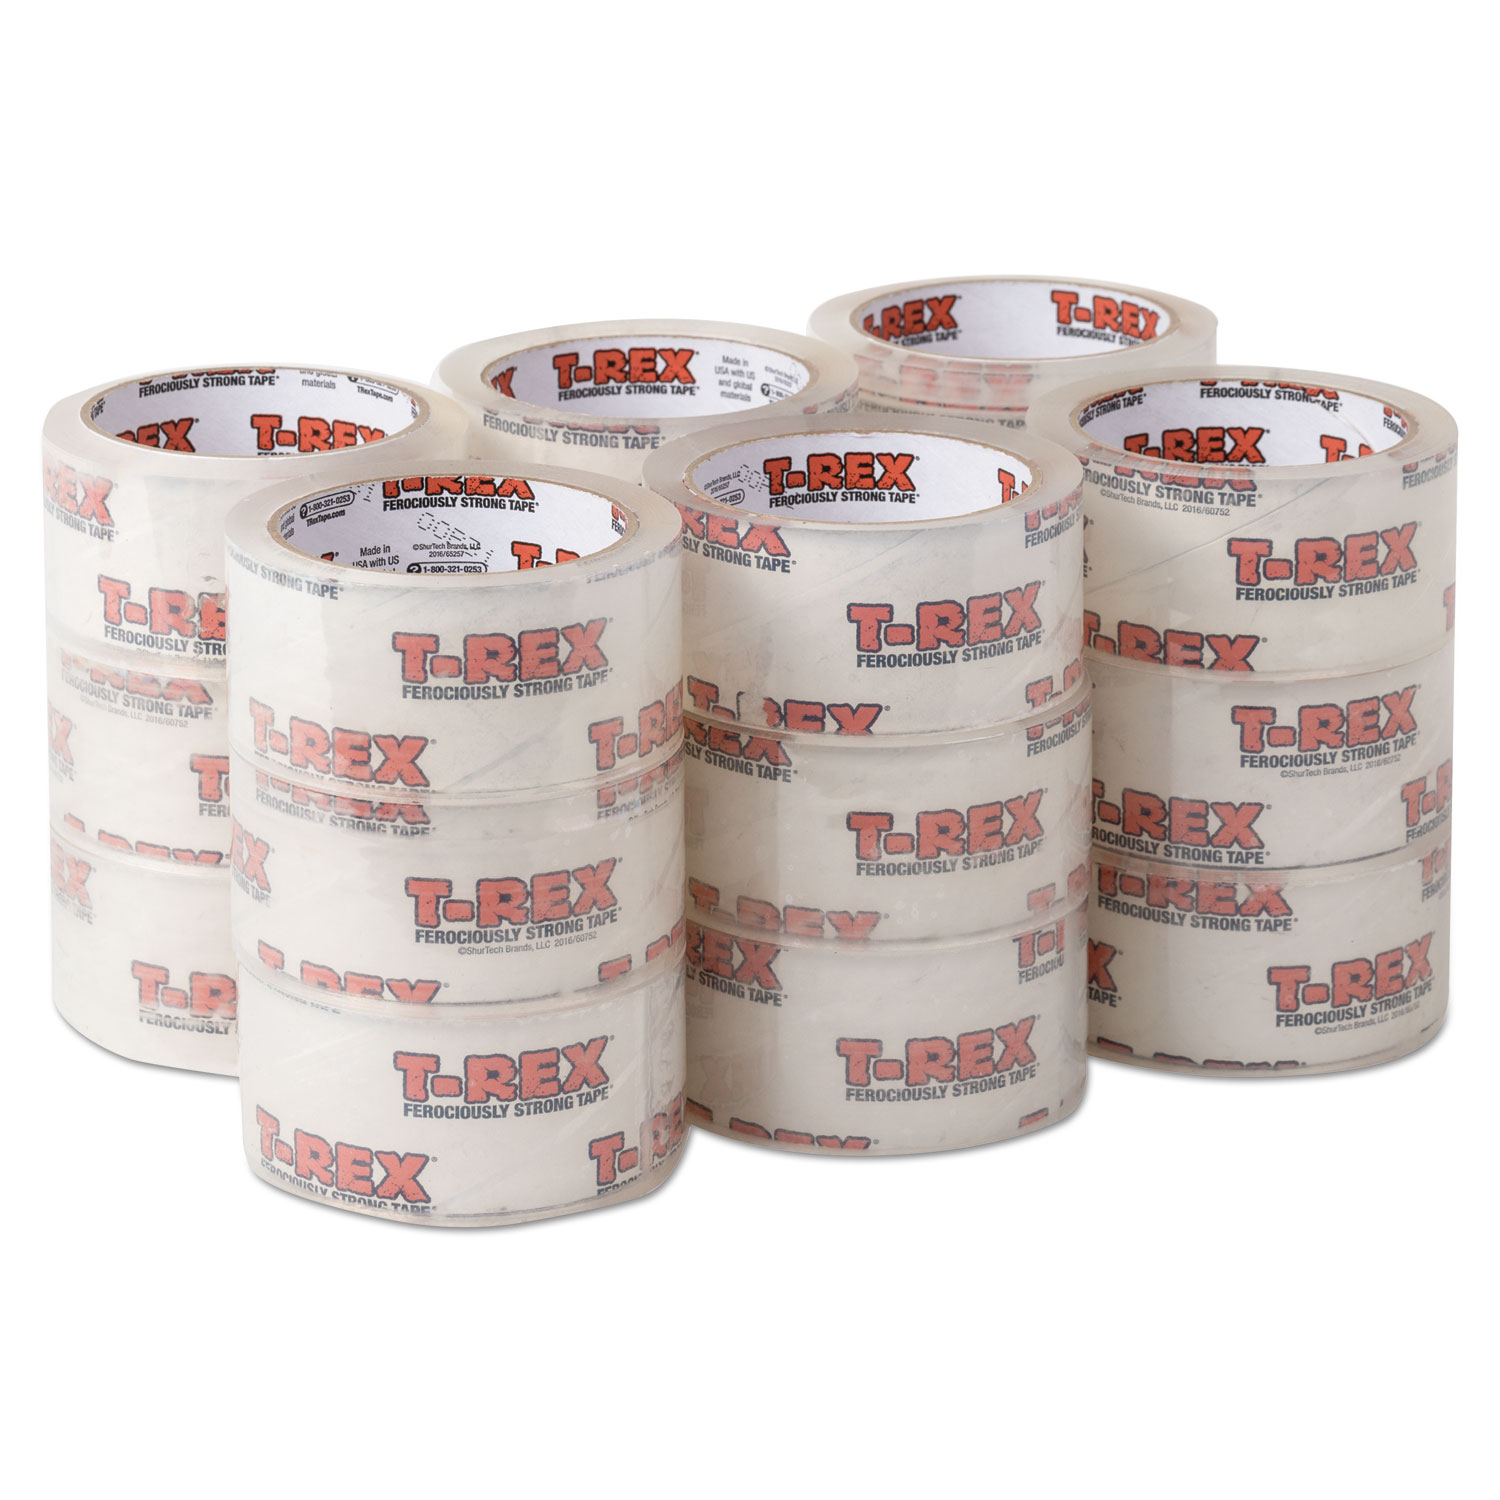  T-REX 285724 Packaging Tape, 1.88 Core, 1.88 x 35 yds, Crystal Clear, 18/Pack (DUC285724) 